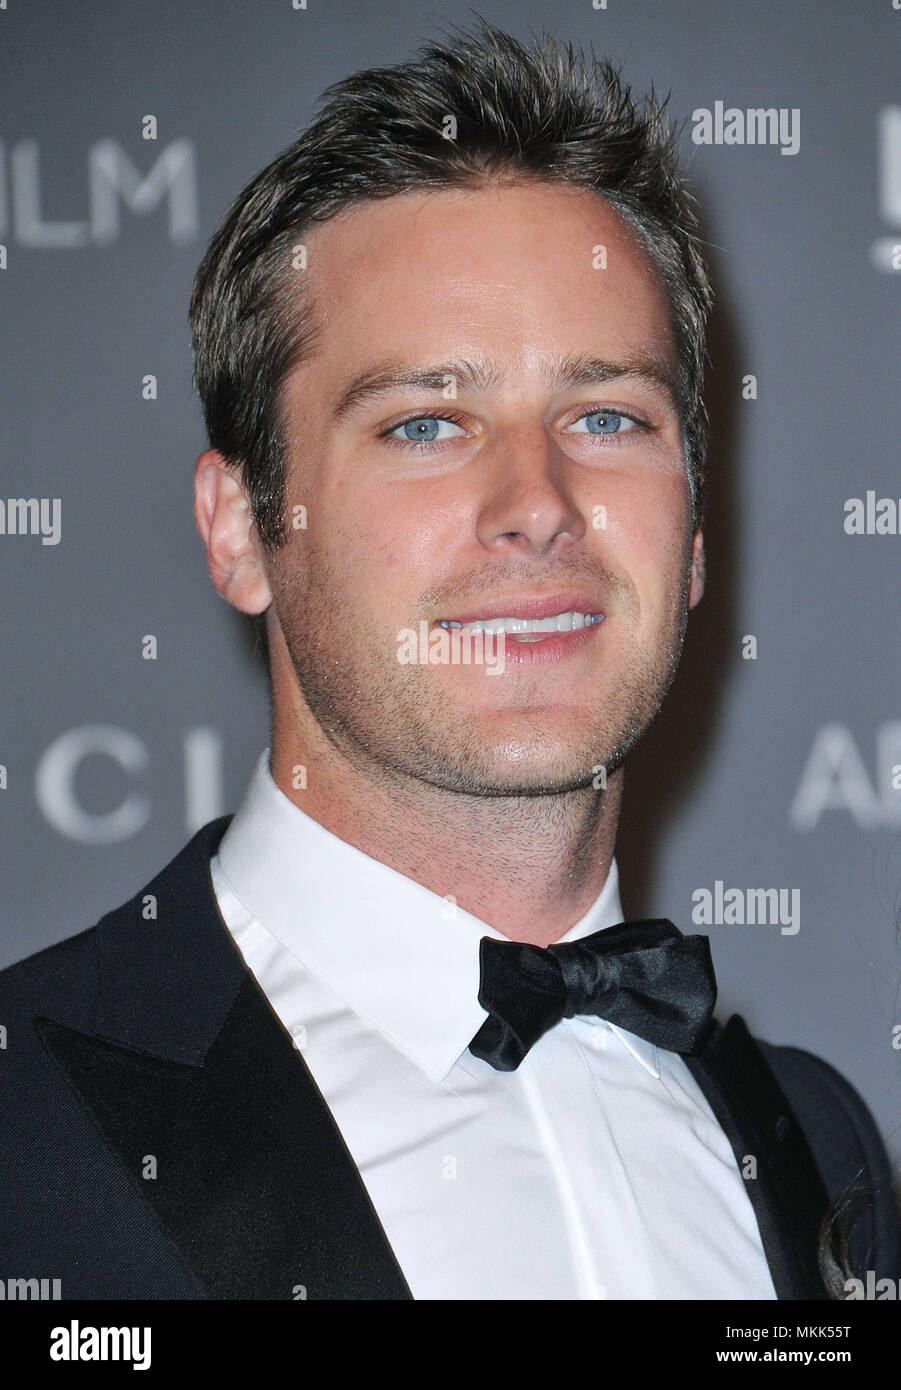 Armie Hammer  at the LACMA 2012 Art Film Gala at the LACMA Museum in Los Angeles.Armie Hammer  125 Red Carpet Event, Vertical, USA, Film Industry, Celebrities,  Photography, Bestof, Arts Culture and Entertainment, Topix Celebrities fashion /  Vertical, Best of, Event in Hollywood Life - California,  Red Carpet and backstage, USA, Film Industry, Celebrities,  movie celebrities, TV celebrities, Music celebrities, Photography, Bestof, Arts Culture and Entertainment,  Topix, headshot, vertical, one person,, from the year , 2012, inquiry tsuni@Gamma-USA.com Stock Photo